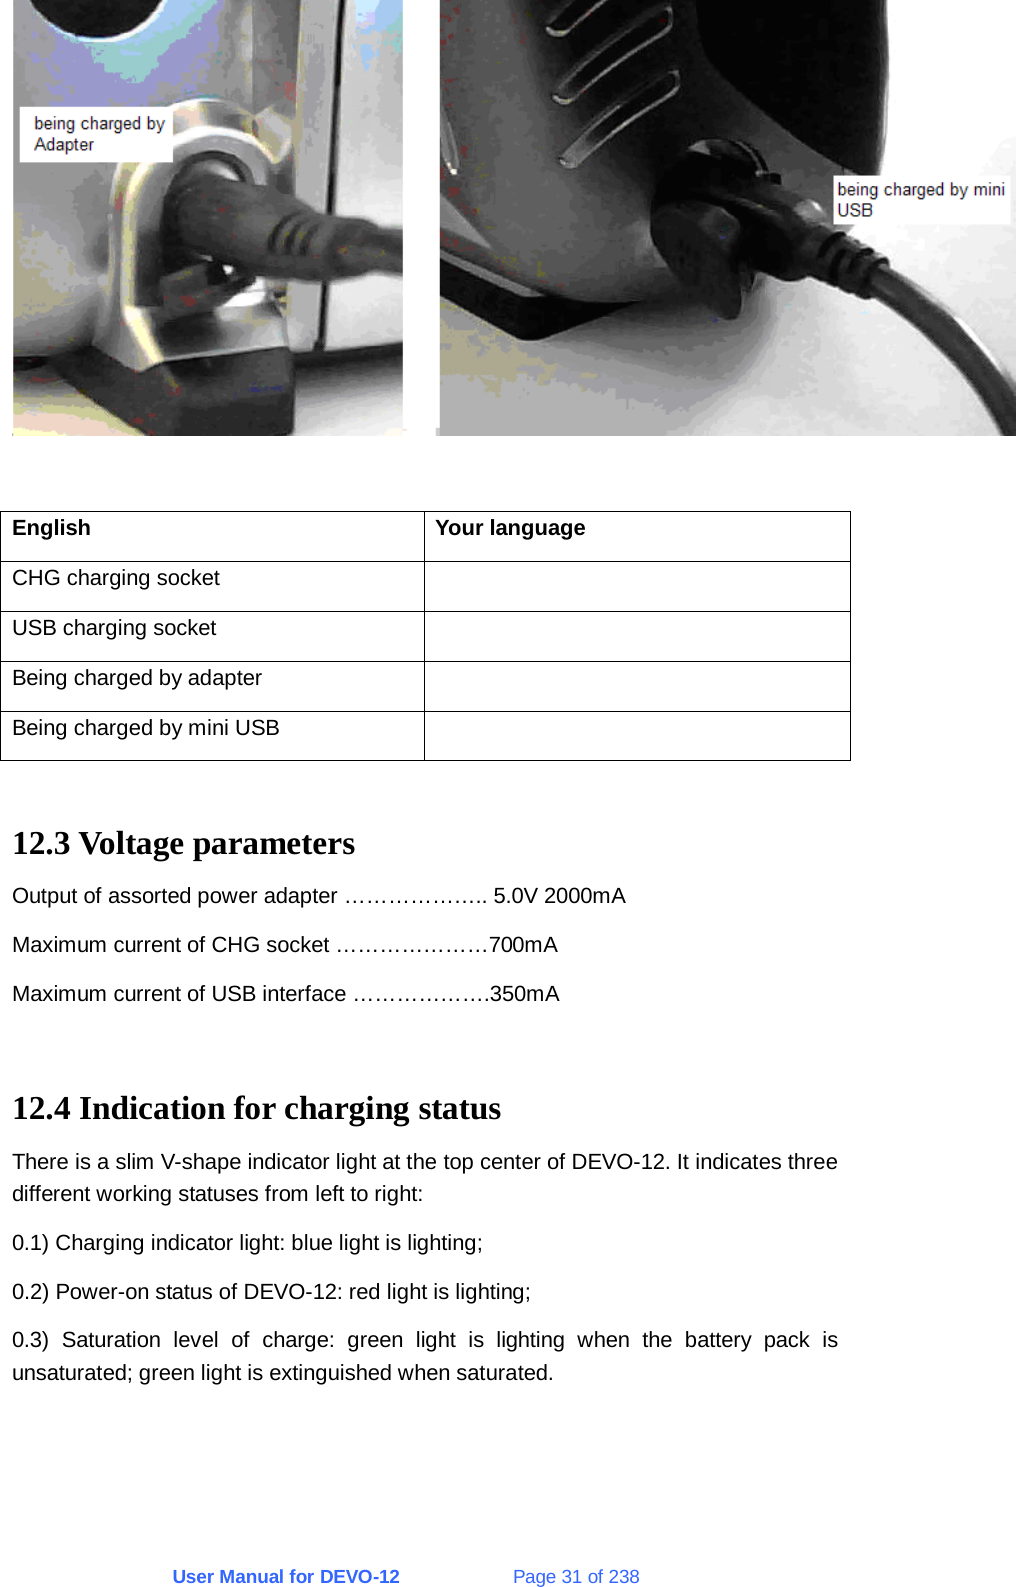 User Manual for DEVO-12             Page 31 of 238   English Your language CHG charging socket   USB charging socket   Being charged by adapter   Being charged by mini USB    12.3 Voltage parameters Output of assorted power adapter ……………….. 5.0V 2000mA Maximum current of CHG socket …………………700mA Maximum current of USB interface ……………….350mA  12.4 Indication for charging status There is a slim V-shape indicator light at the top center of DEVO-12. It indicates three different working statuses from left to right: 0.1) Charging indicator light: blue light is lighting; 0.2) Power-on status of DEVO-12: red light is lighting; 0.3) Saturation level of charge: green light is lighting when the battery pack is unsaturated; green light is extinguished when saturated. 